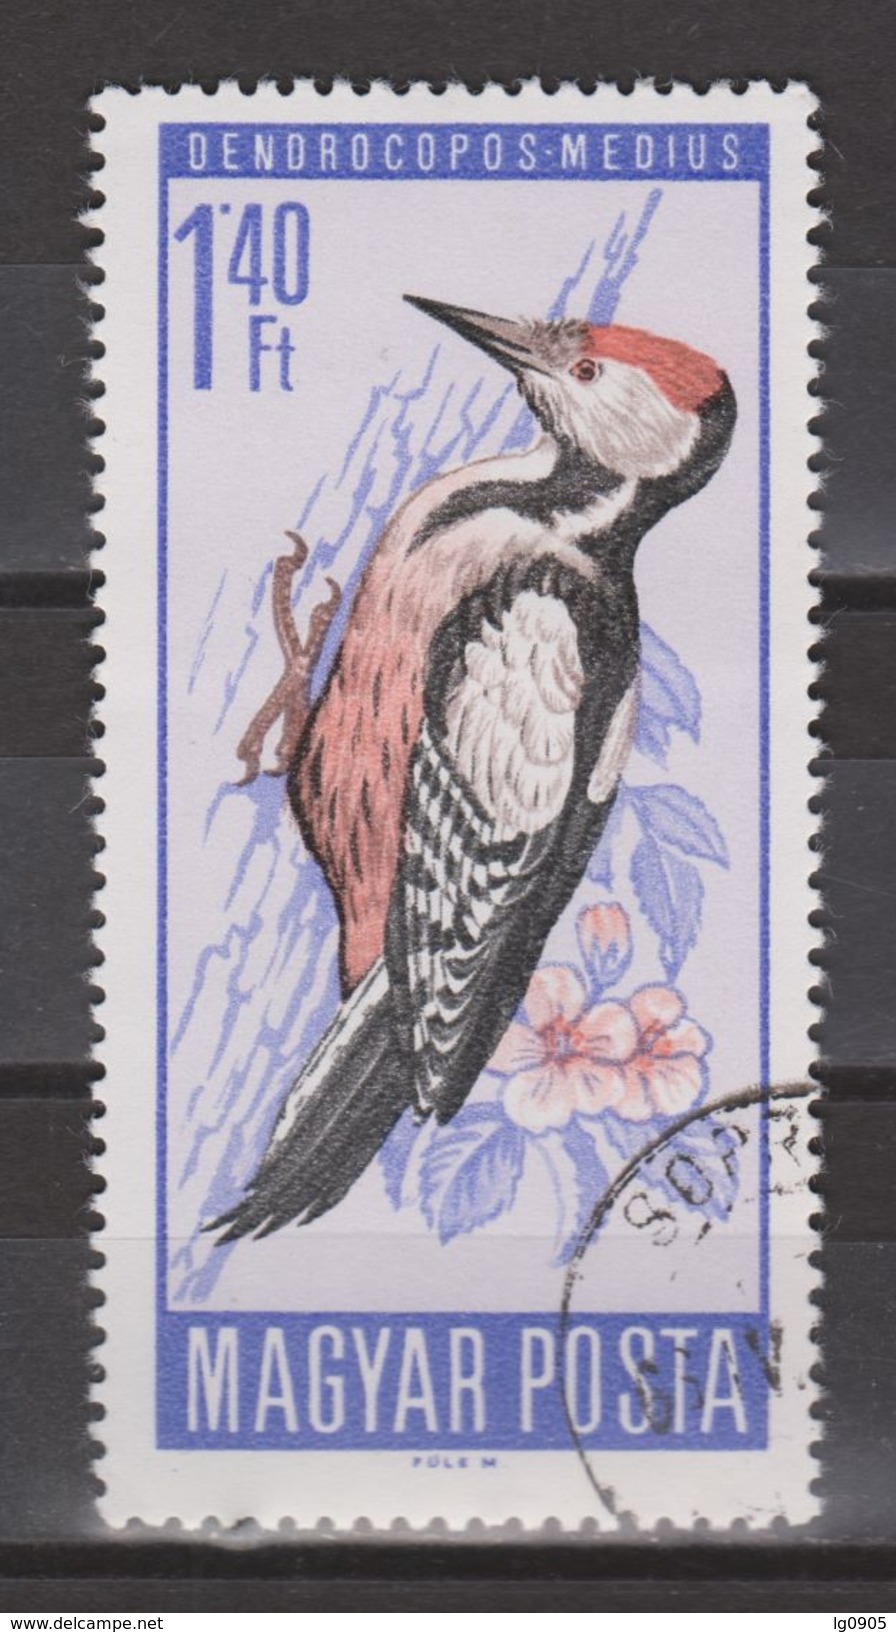 Hongarije, Hungary, Ungarn, Magyar Used ; Specht, Pic, Pico, Woodpecker NOW MANY BIRD STAMPS FOR SALE - Climbing Birds